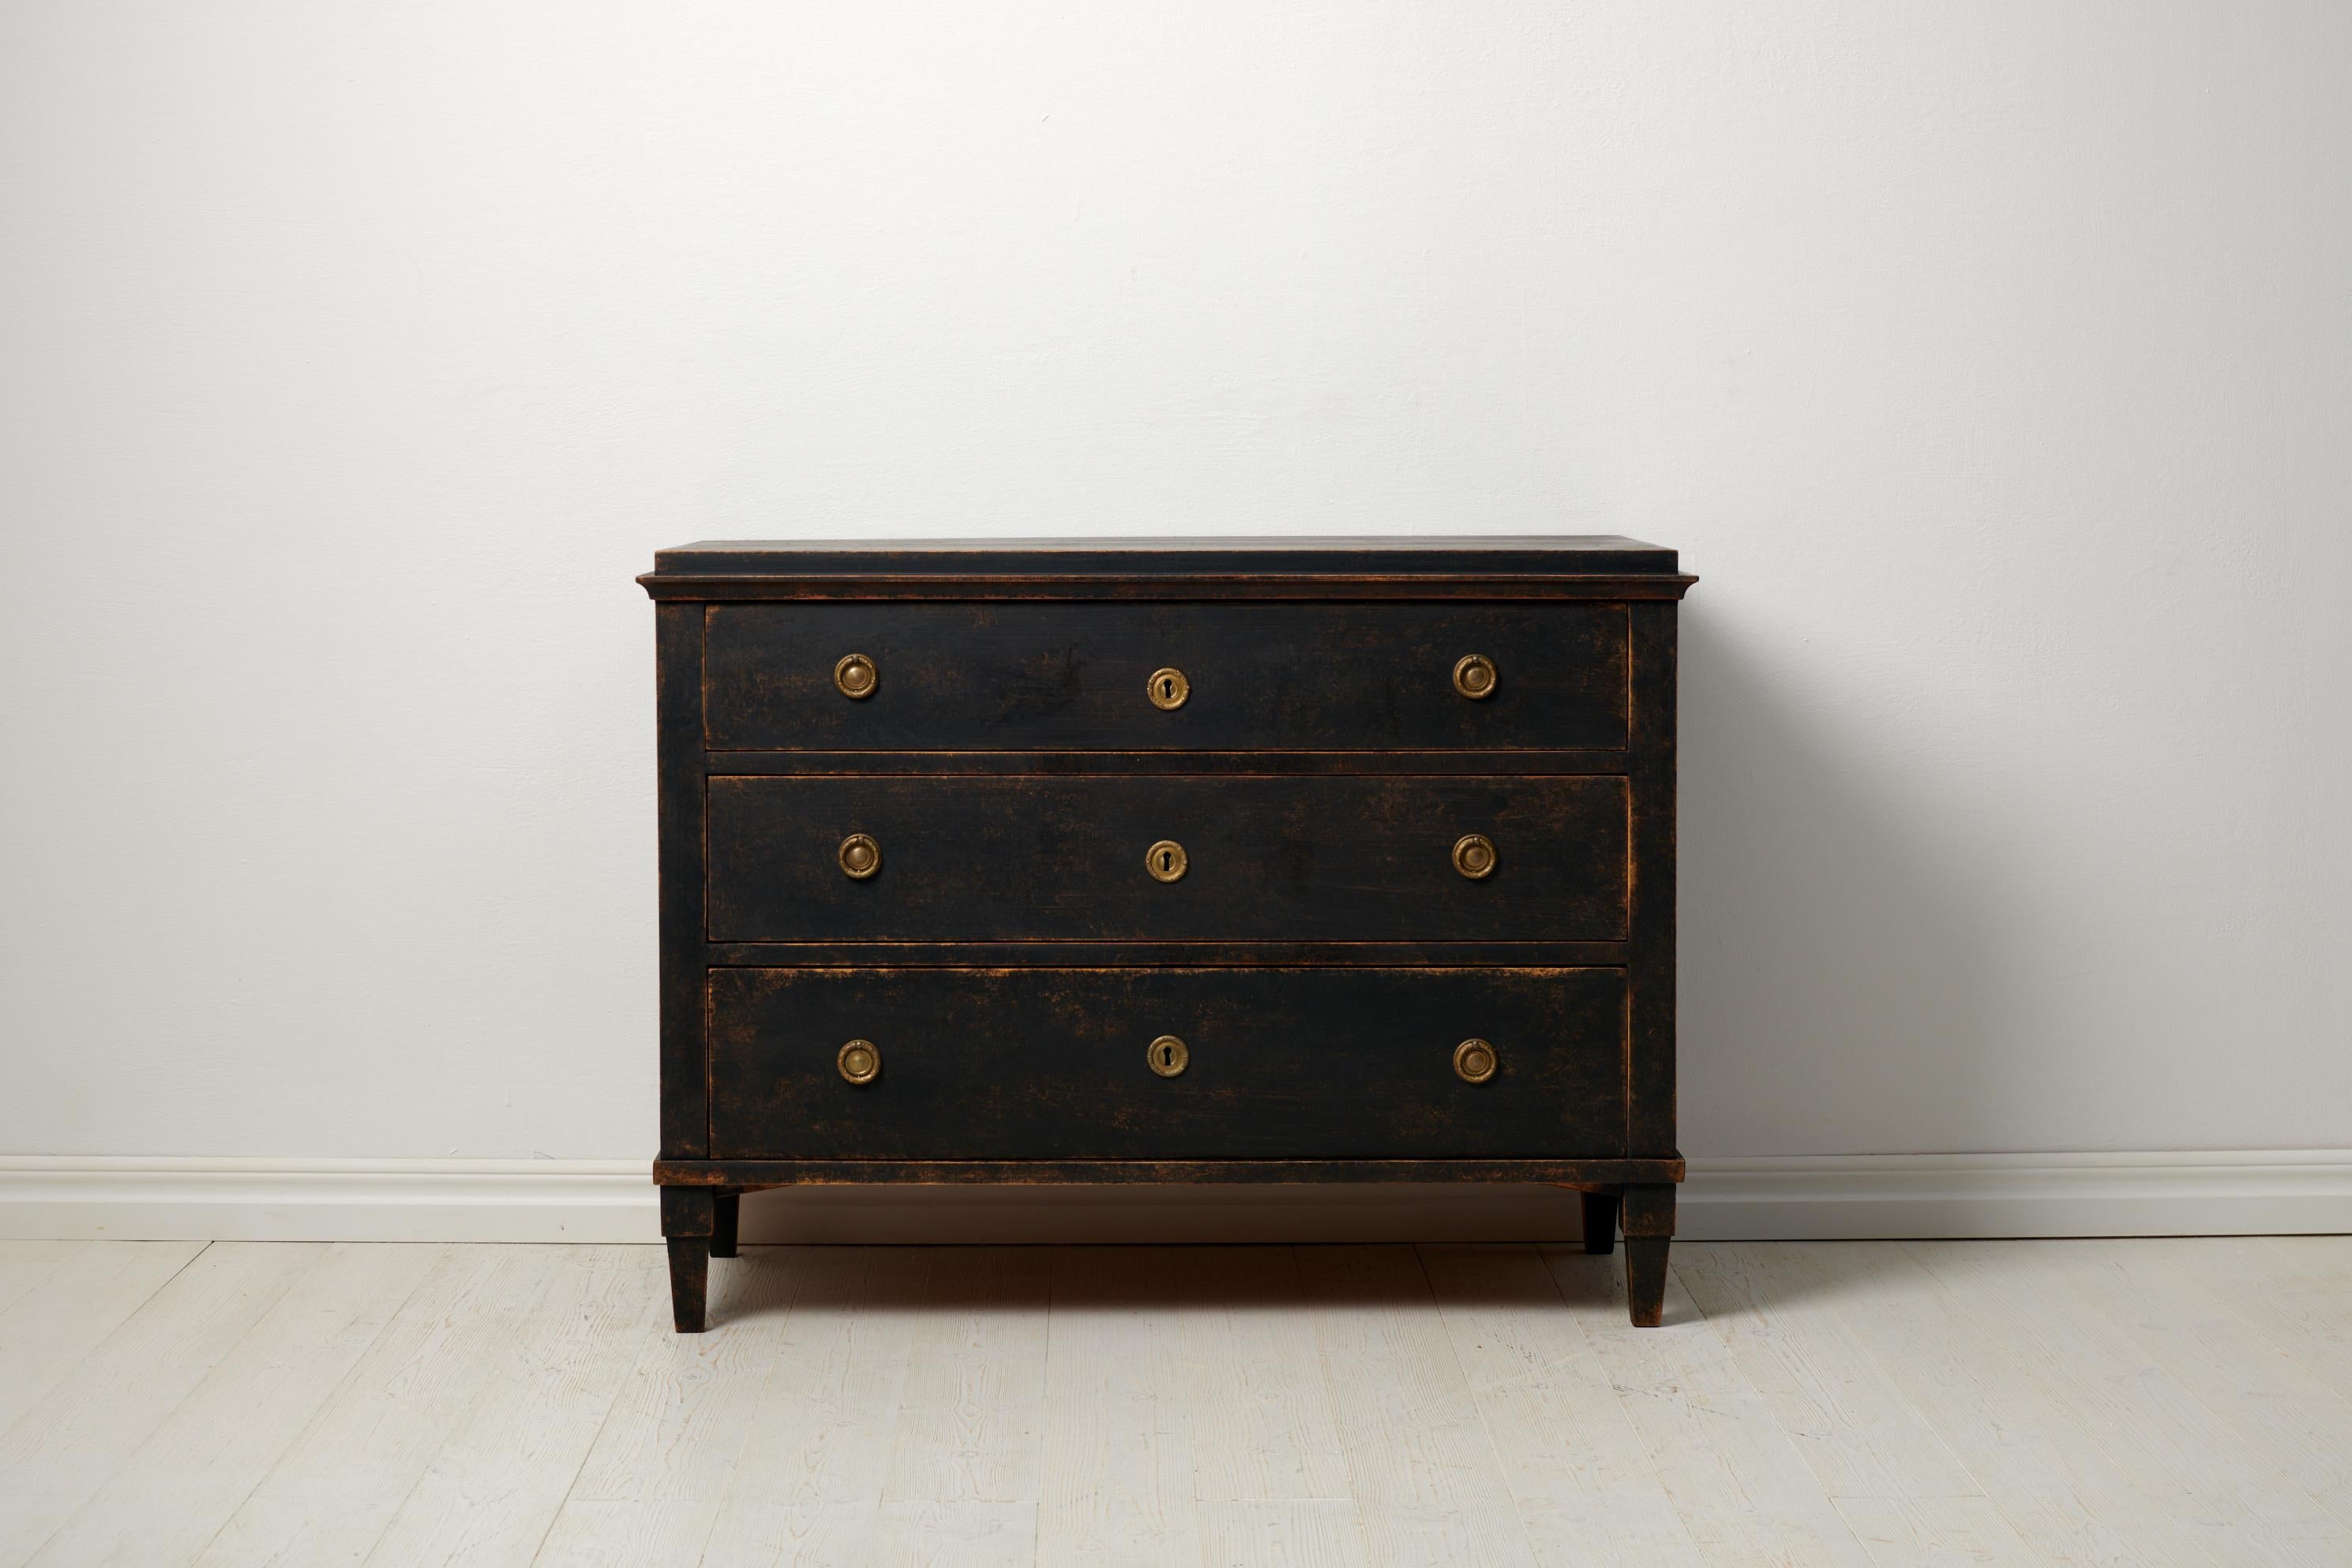 Antique Swedish gustavian chest of drawers with three drawers. The chest is made in Stockholm around 1810 and has a frame in solid pine. The top drawer has an interior with multiple smaller drawers. The locks are still present but unfortunately the